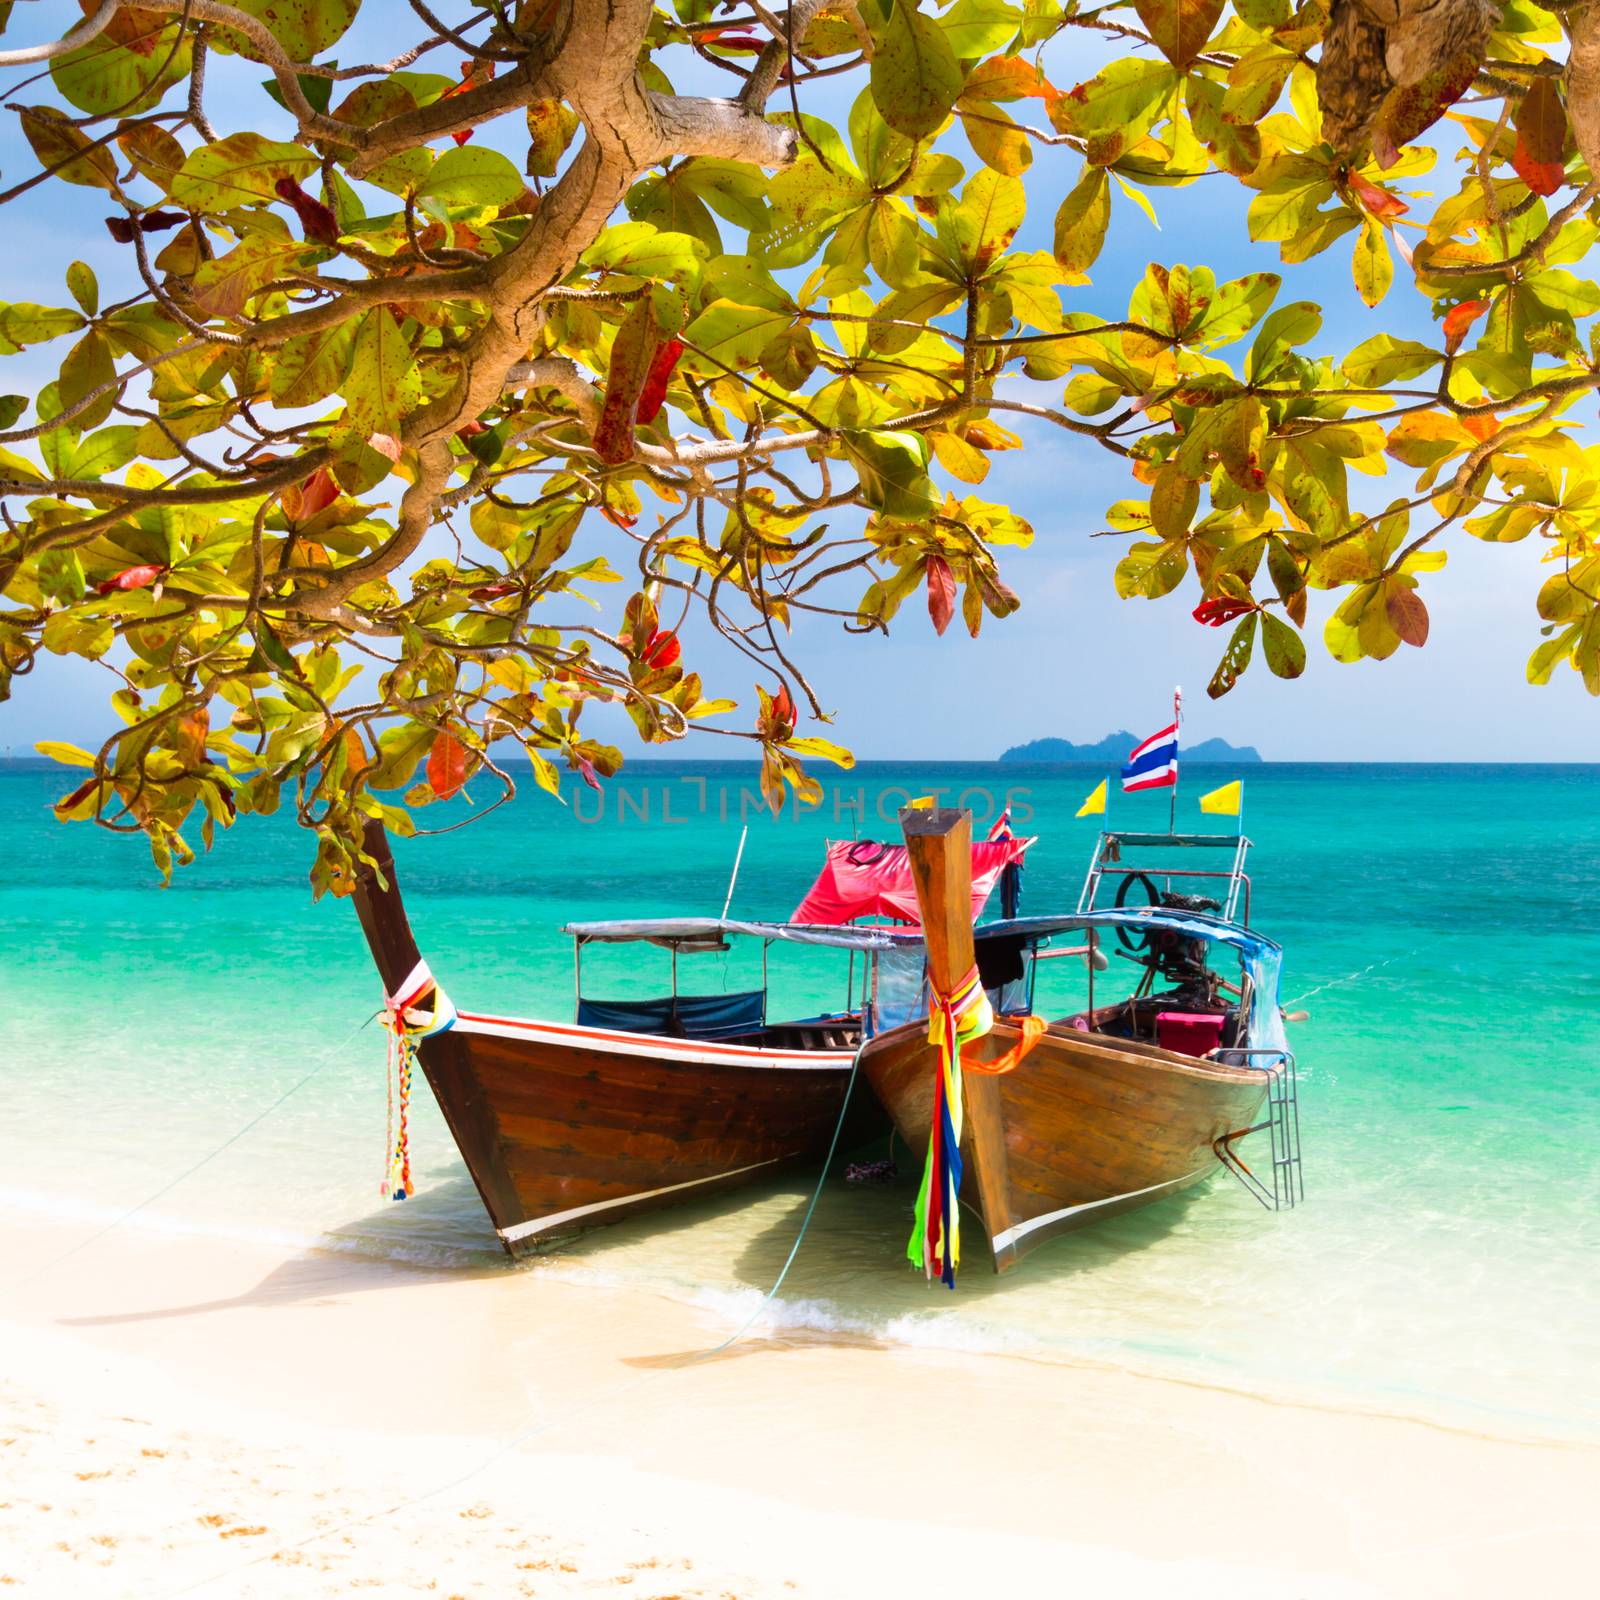 Traditional wooden long tail boats on a picture perfect tropical beach near Phuket, Thailand, Asia.